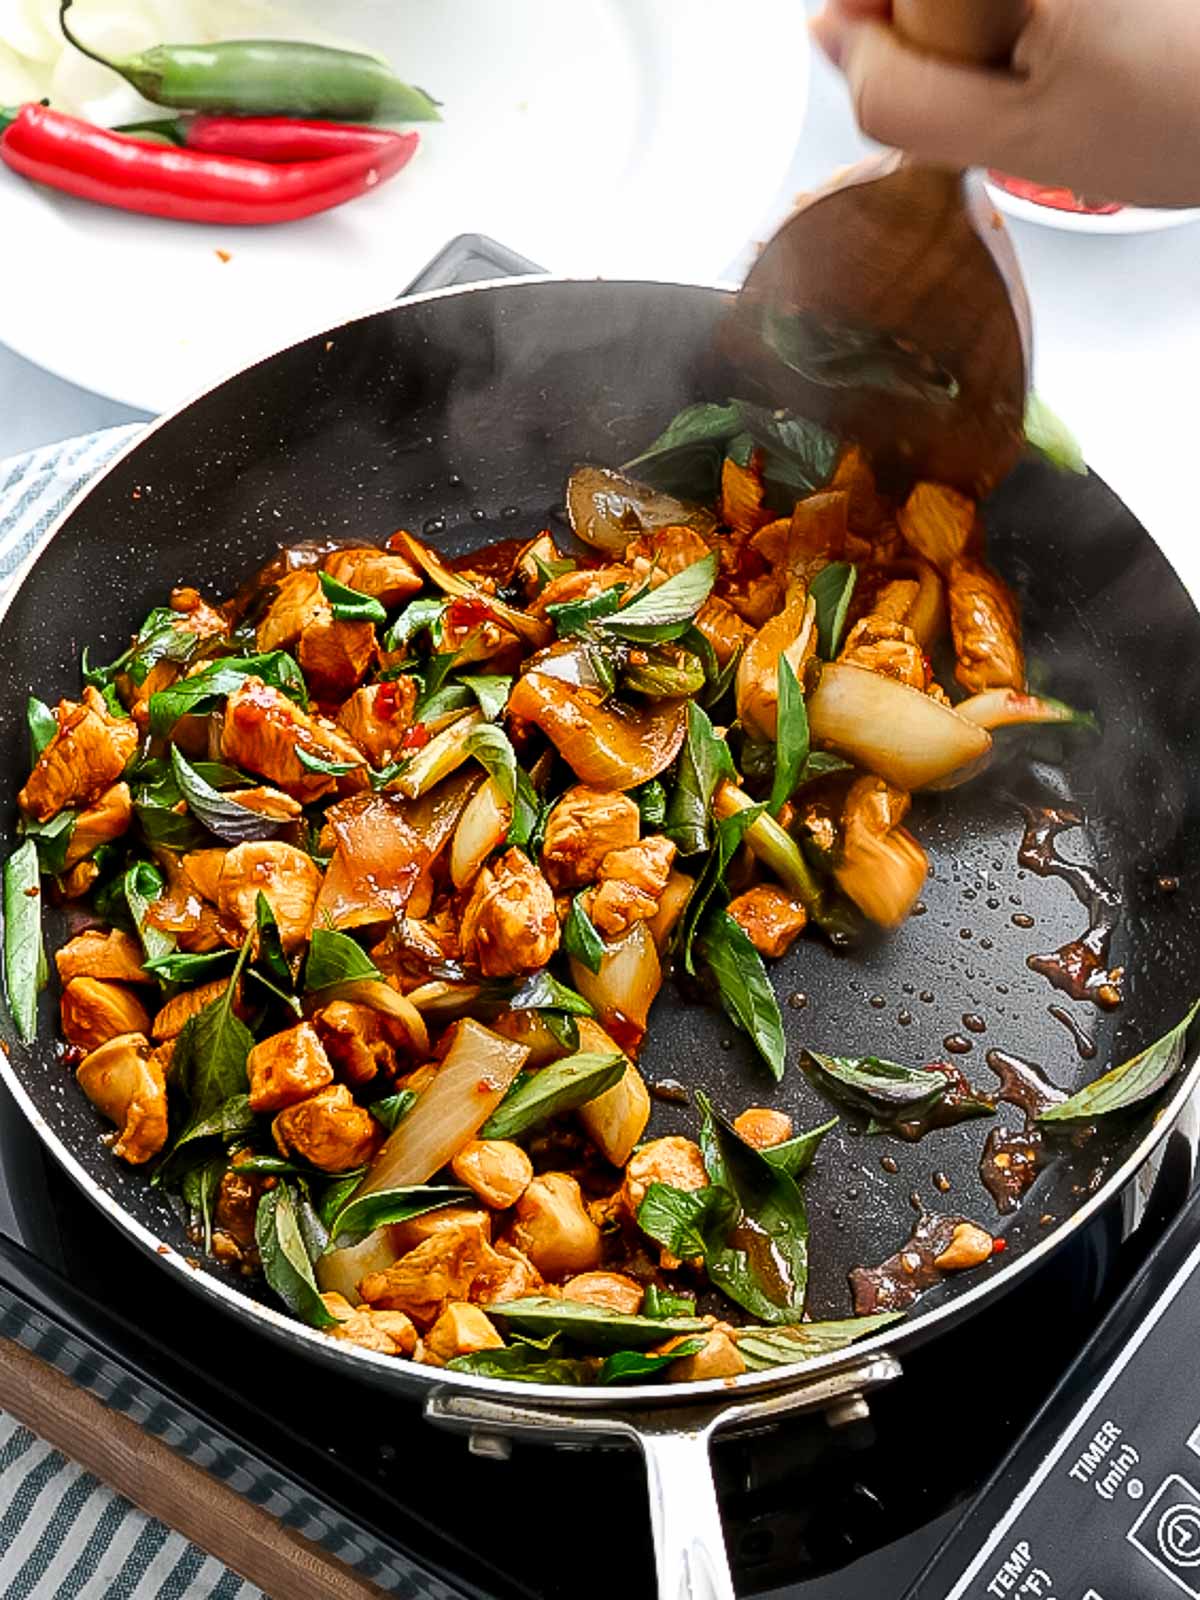 Thai basil stir frying with chicken in a pan.